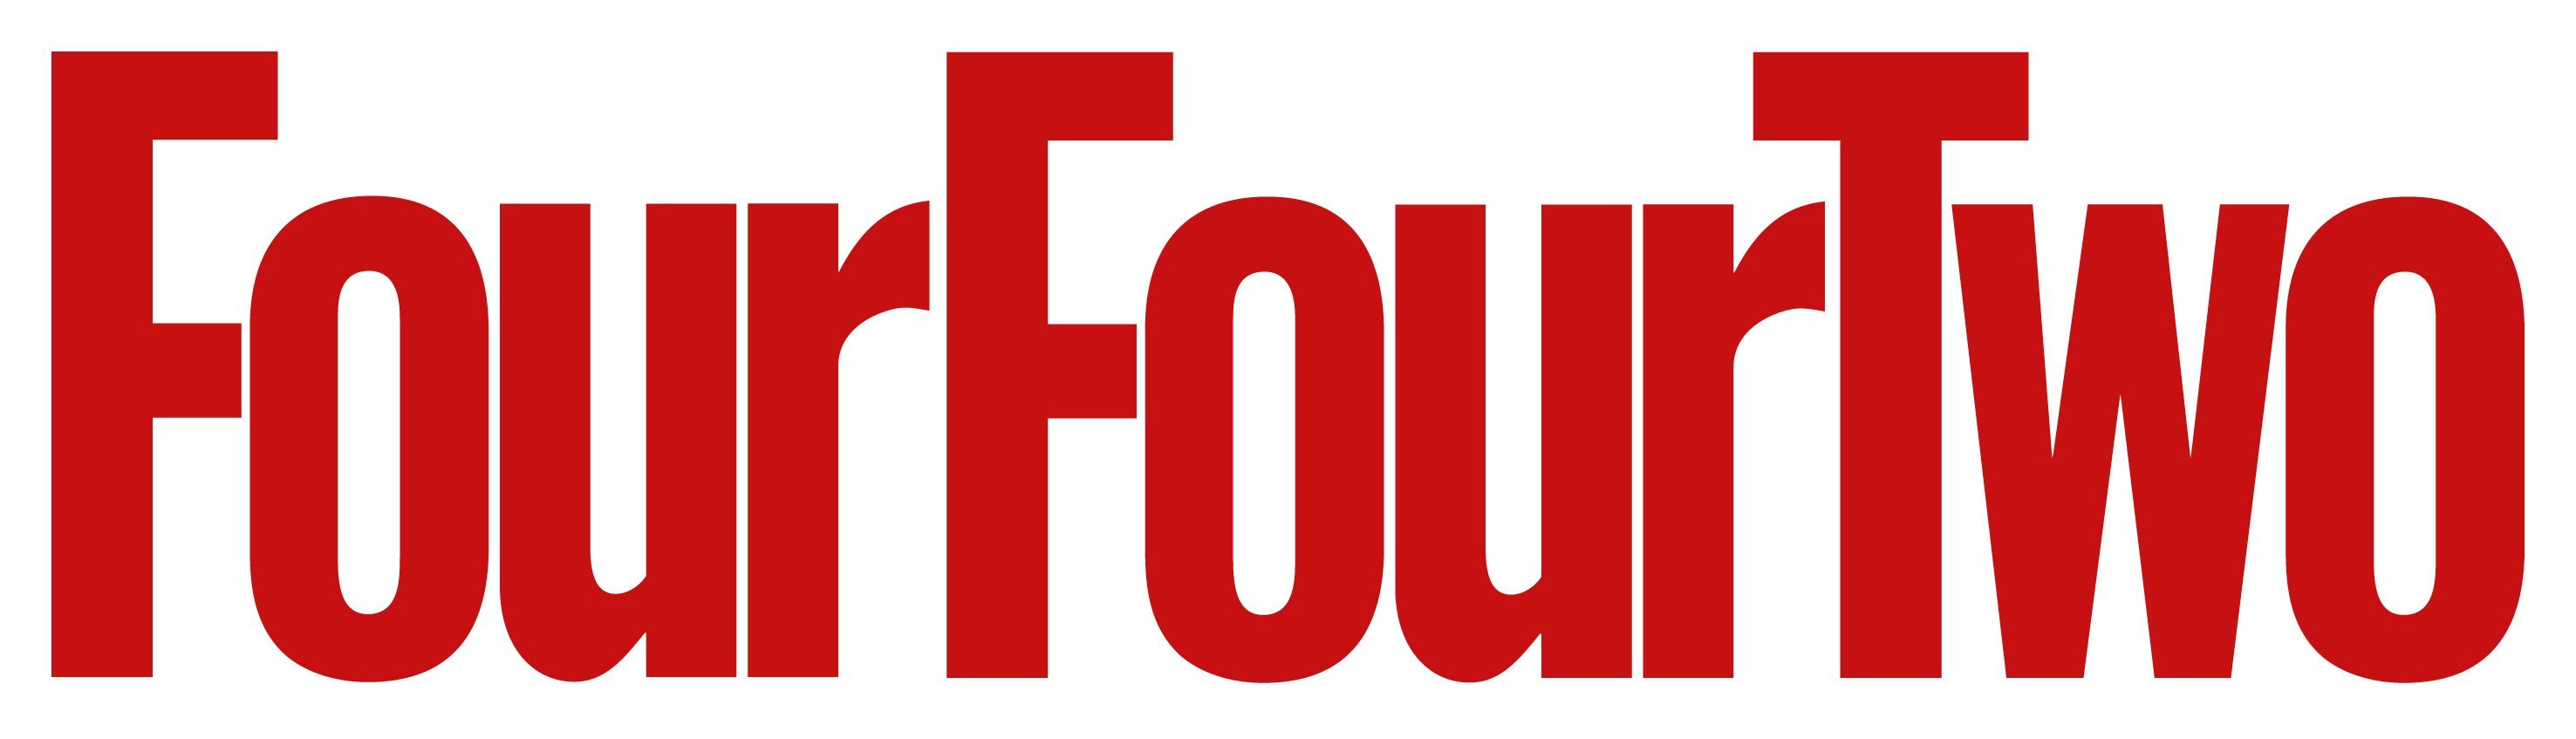 FourFourTwo Review